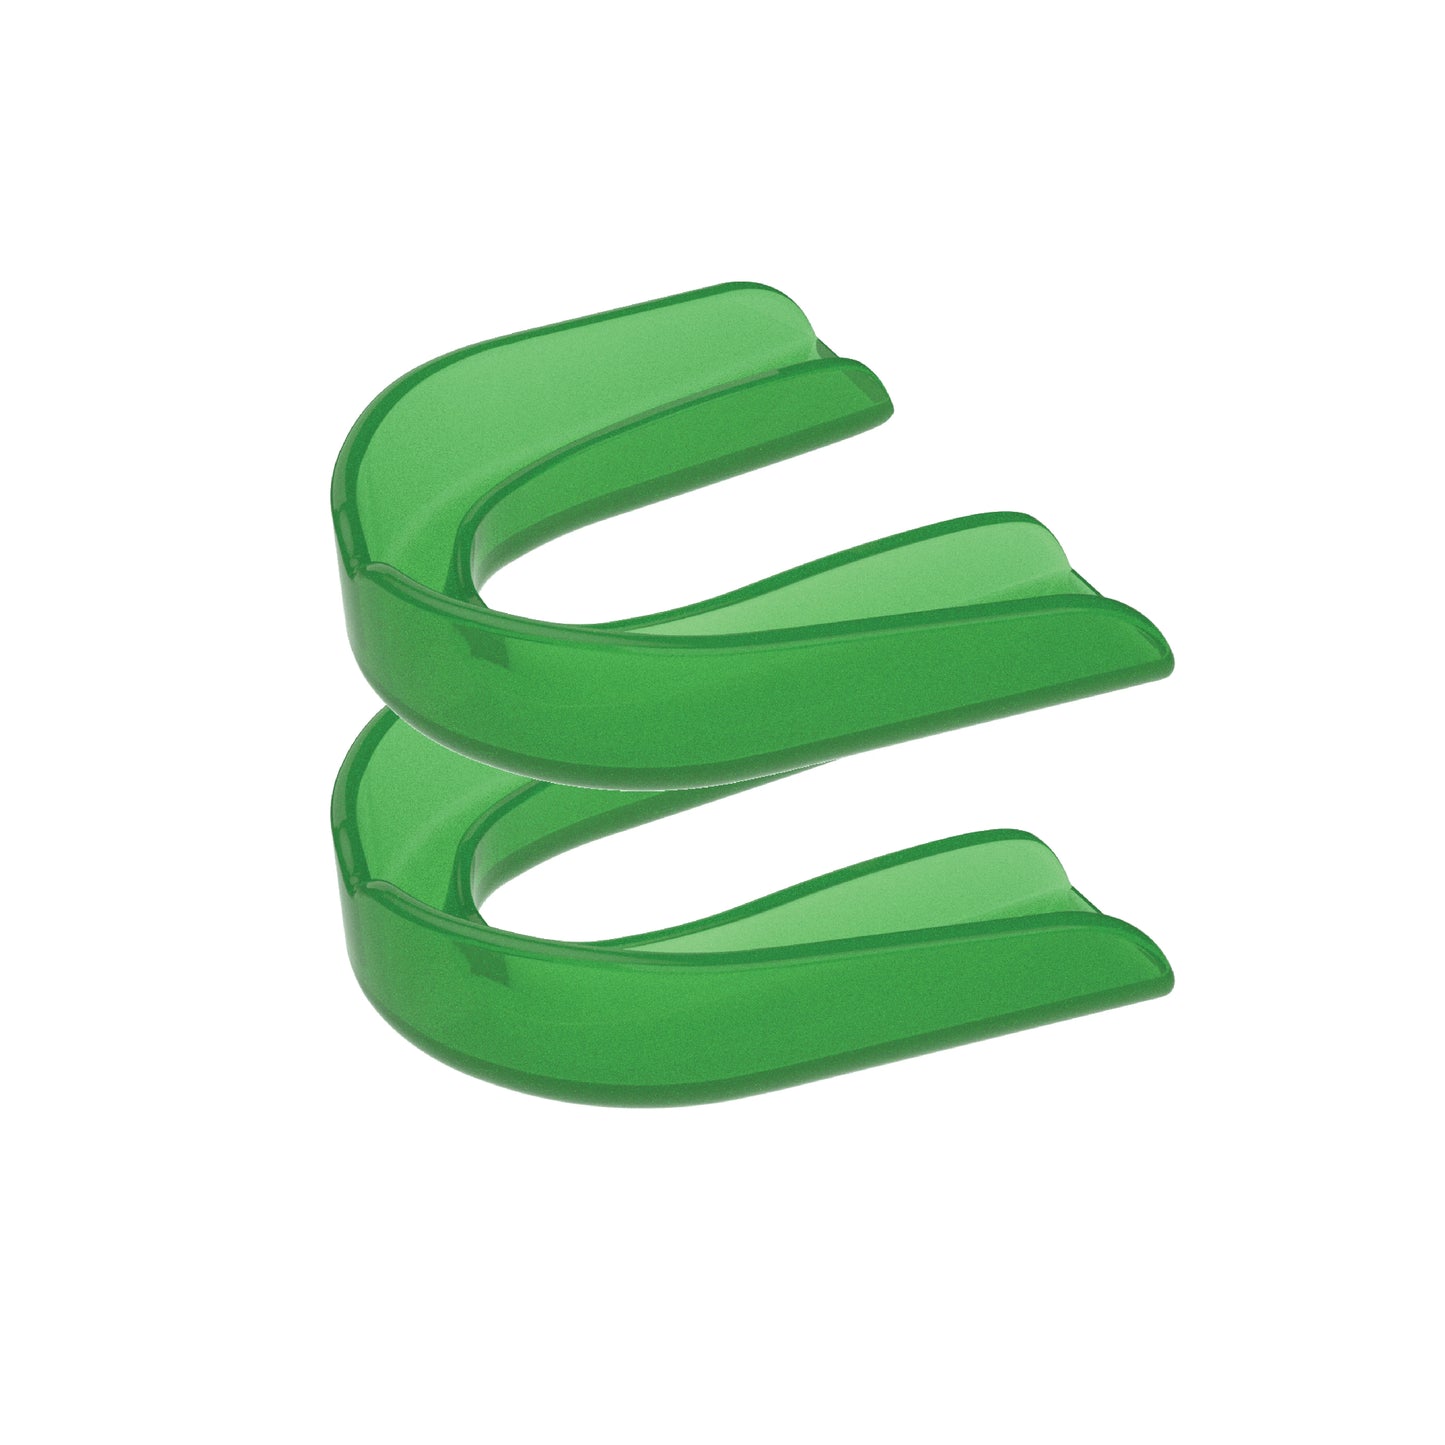 Two green strapless mouth guards 